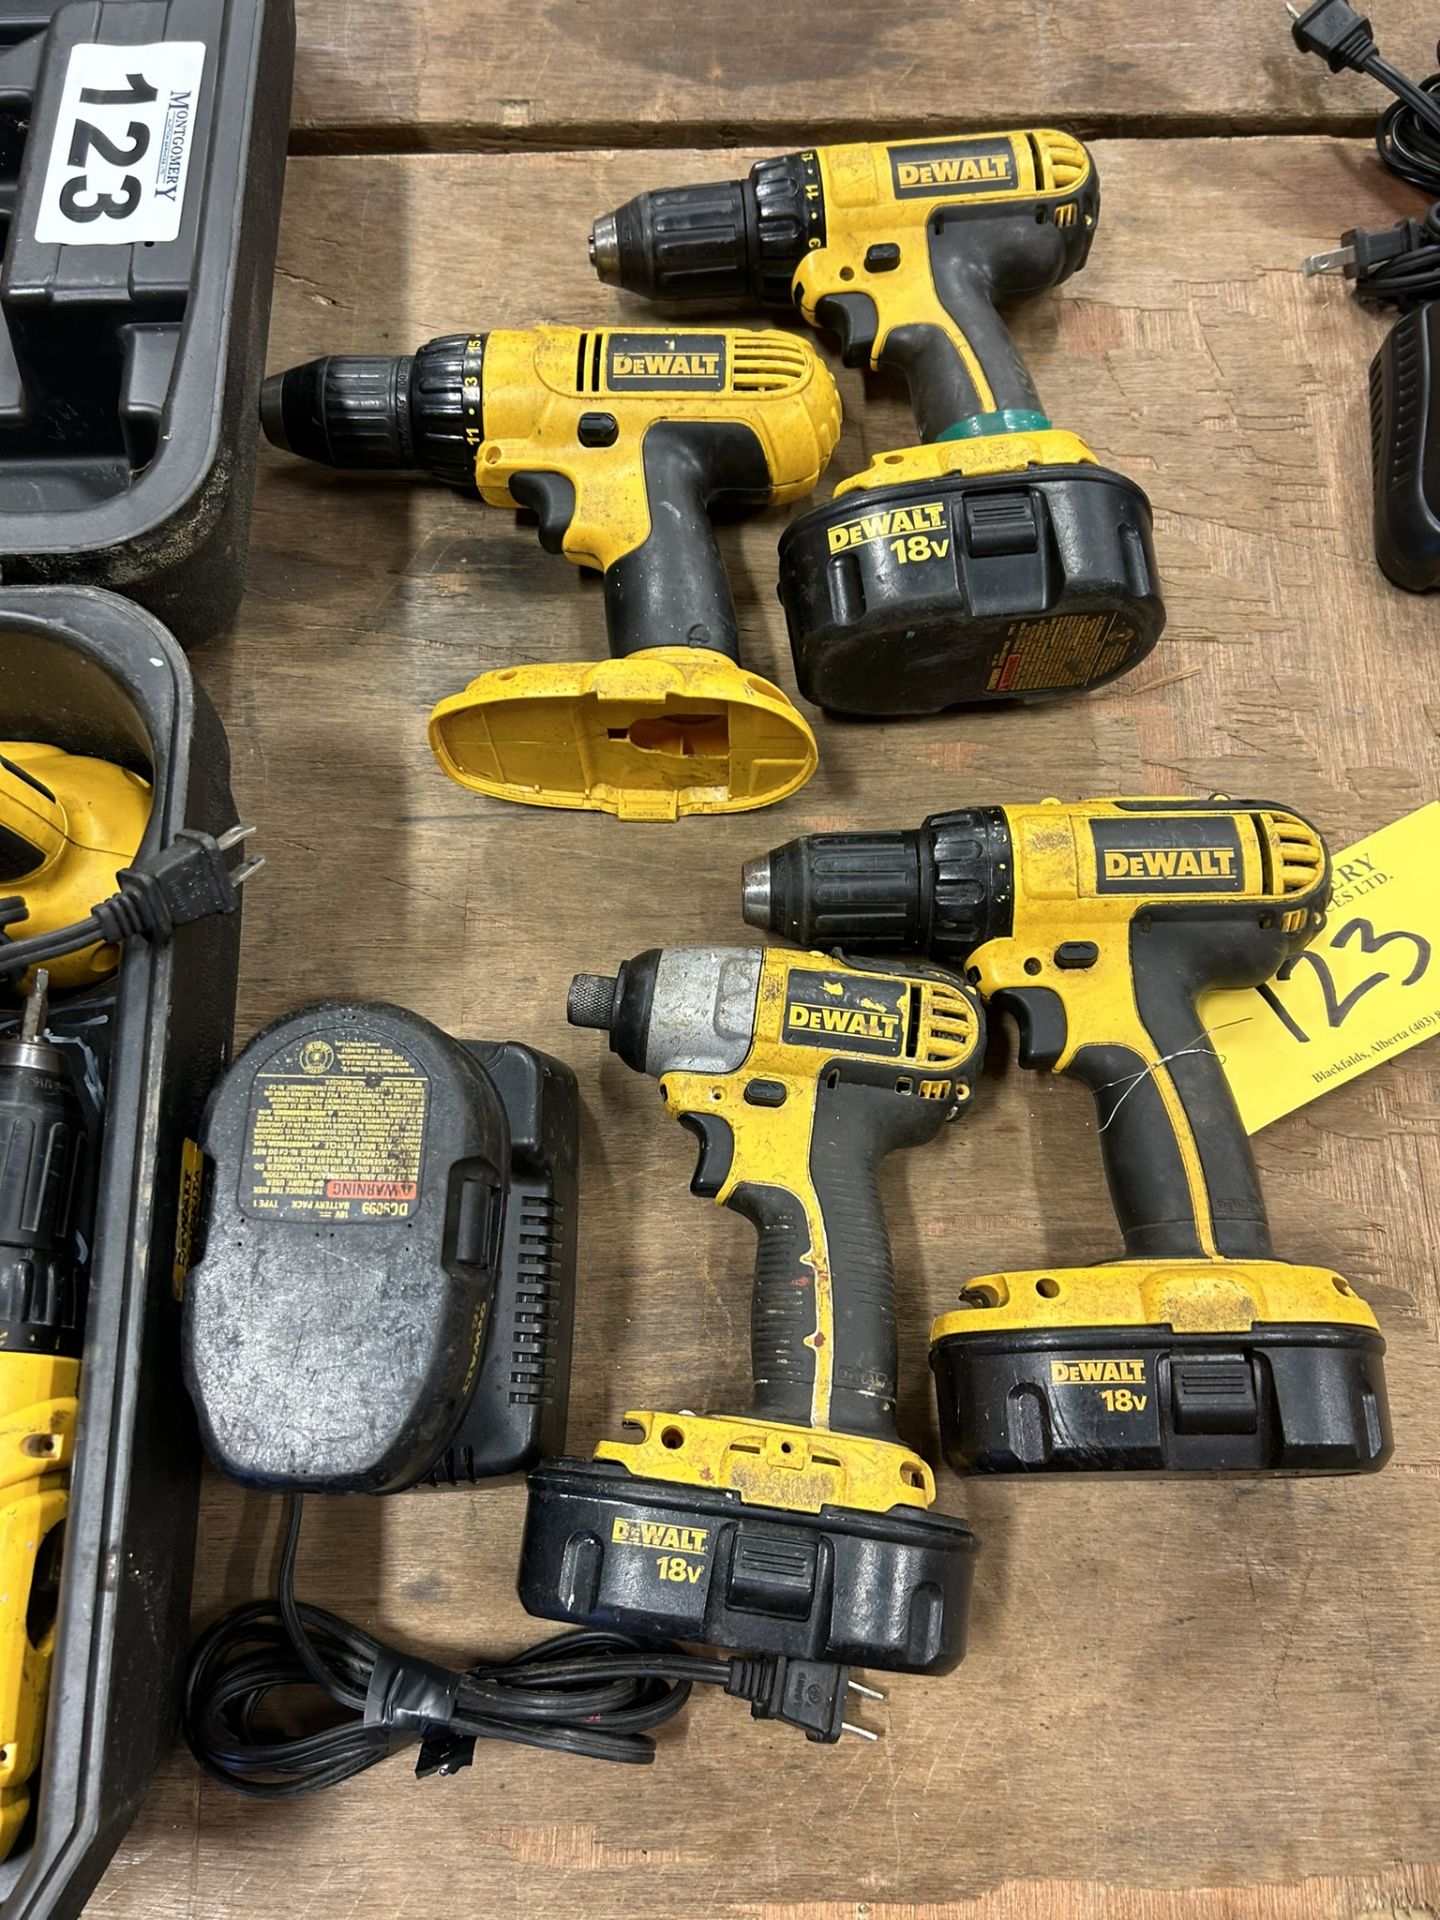 DEWALT 18V CORDLESS KIT W/ ASSORTED BATTERIES AND CHARGERS - Image 3 of 6